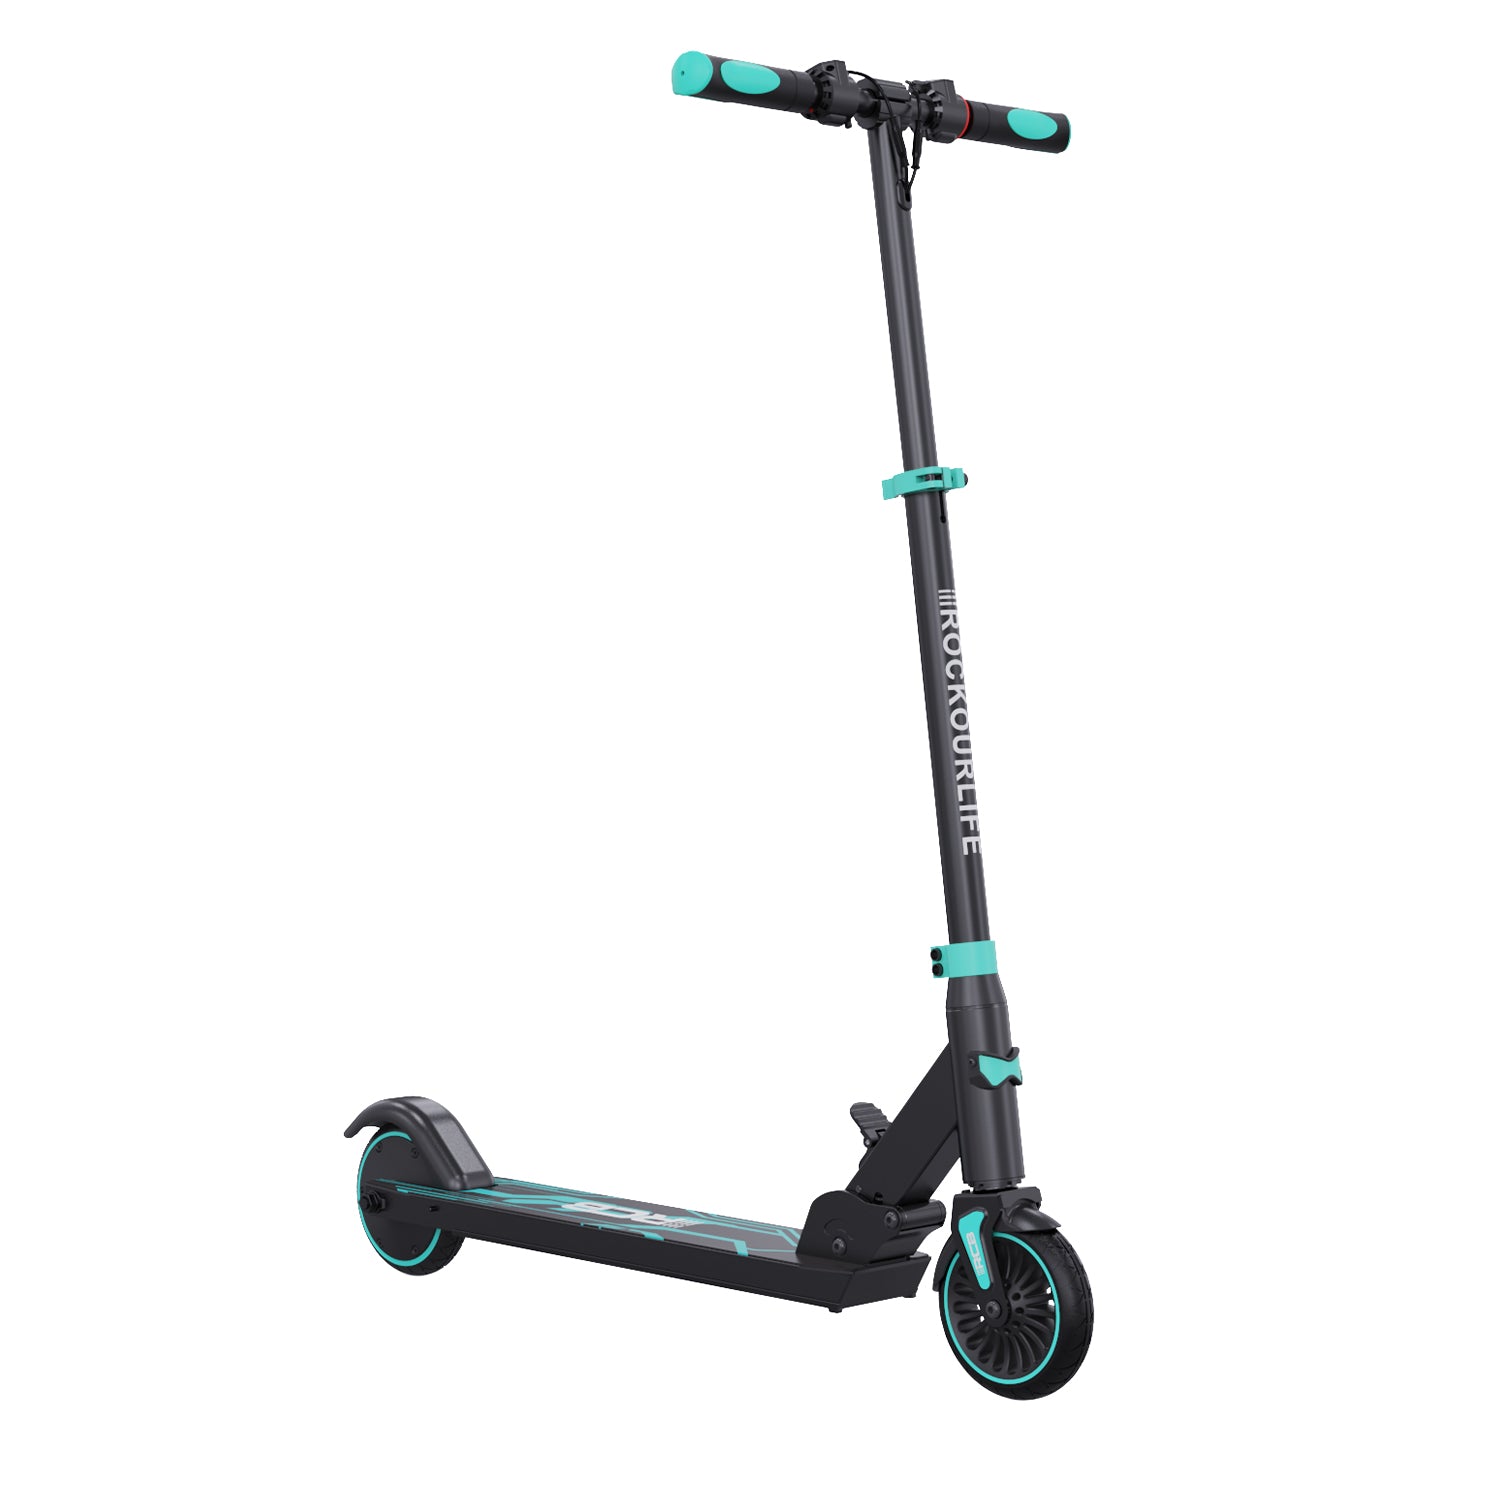 RCB R15 Electric Scooter for Kids & Teens